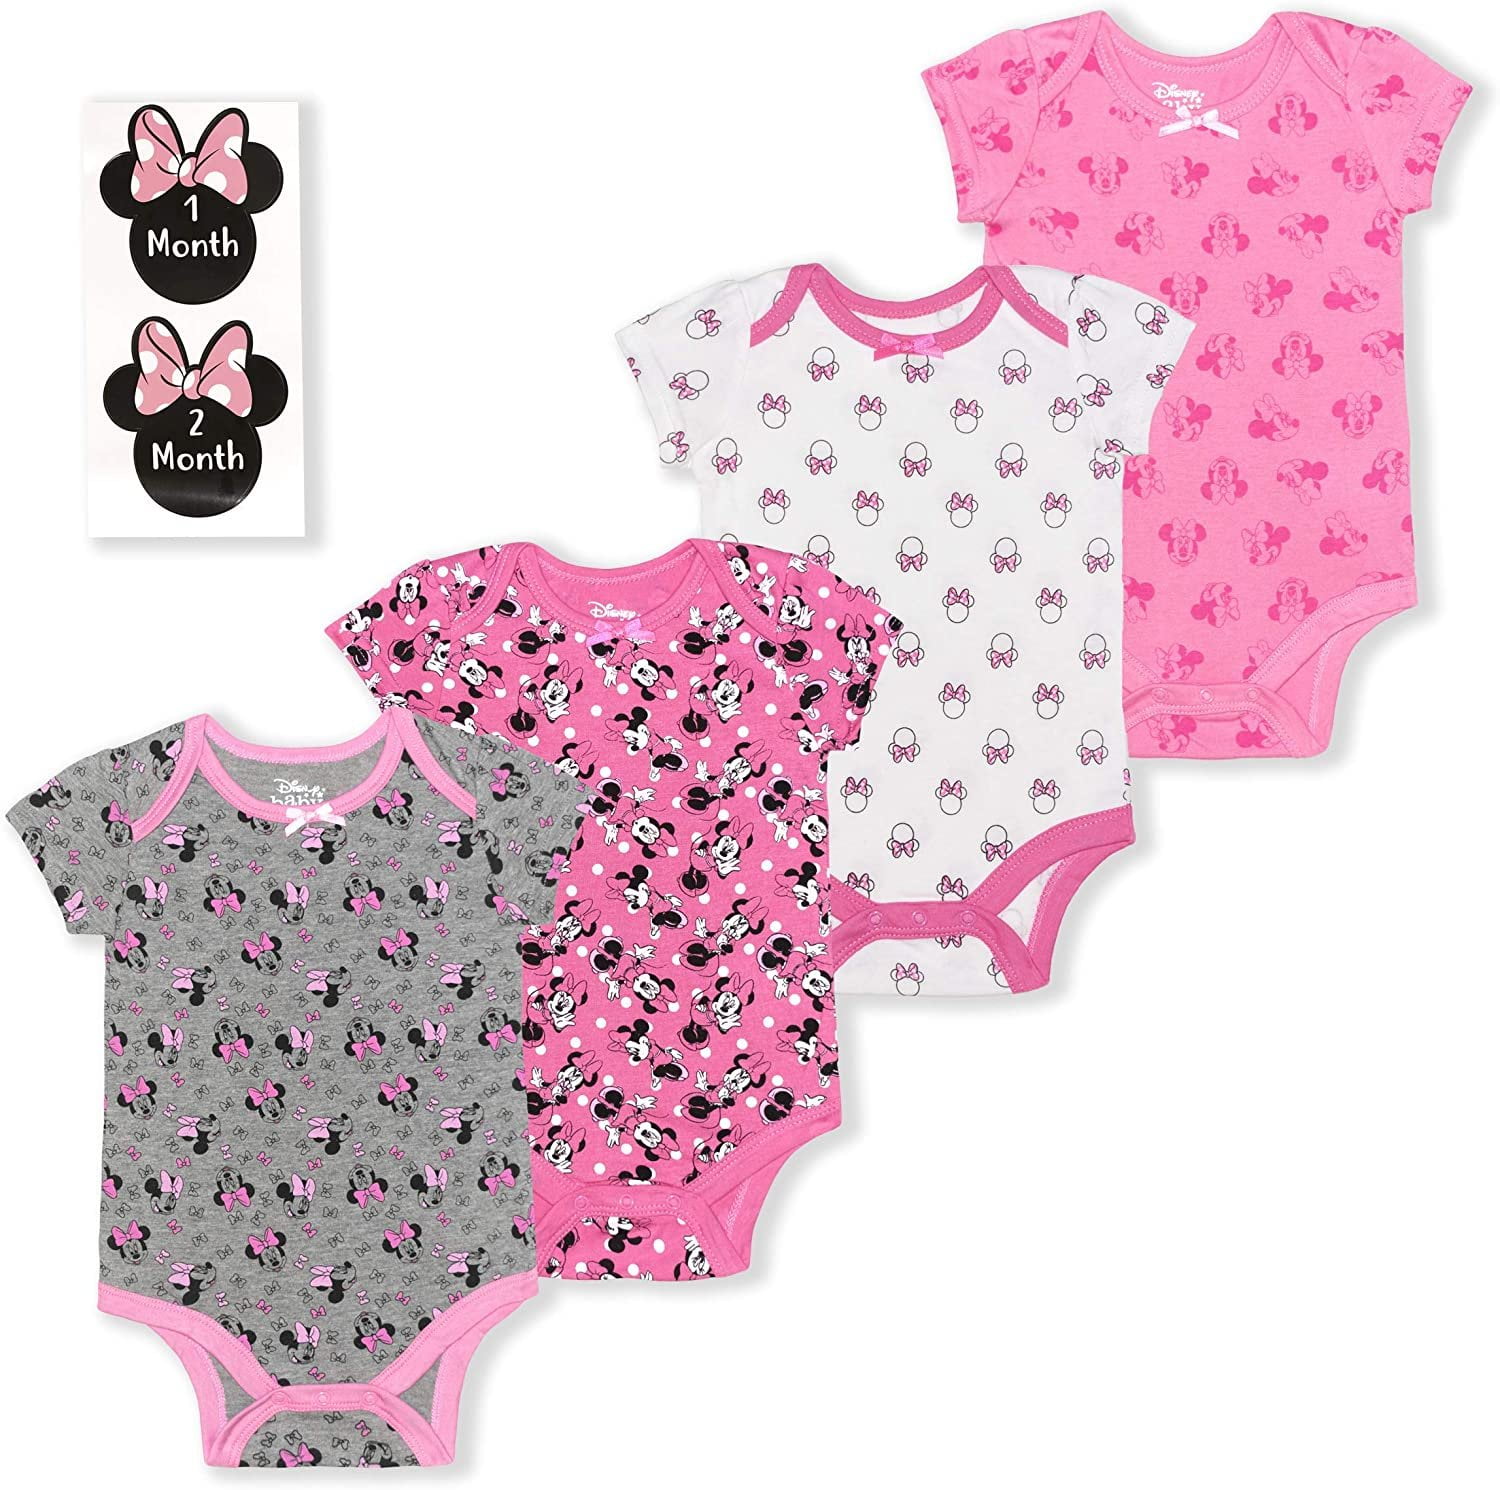 0-12 Months Pink Disney Girl's 4-Pack Minnie Mouse Bodysuit Creeper with 12 Milestone Stickers